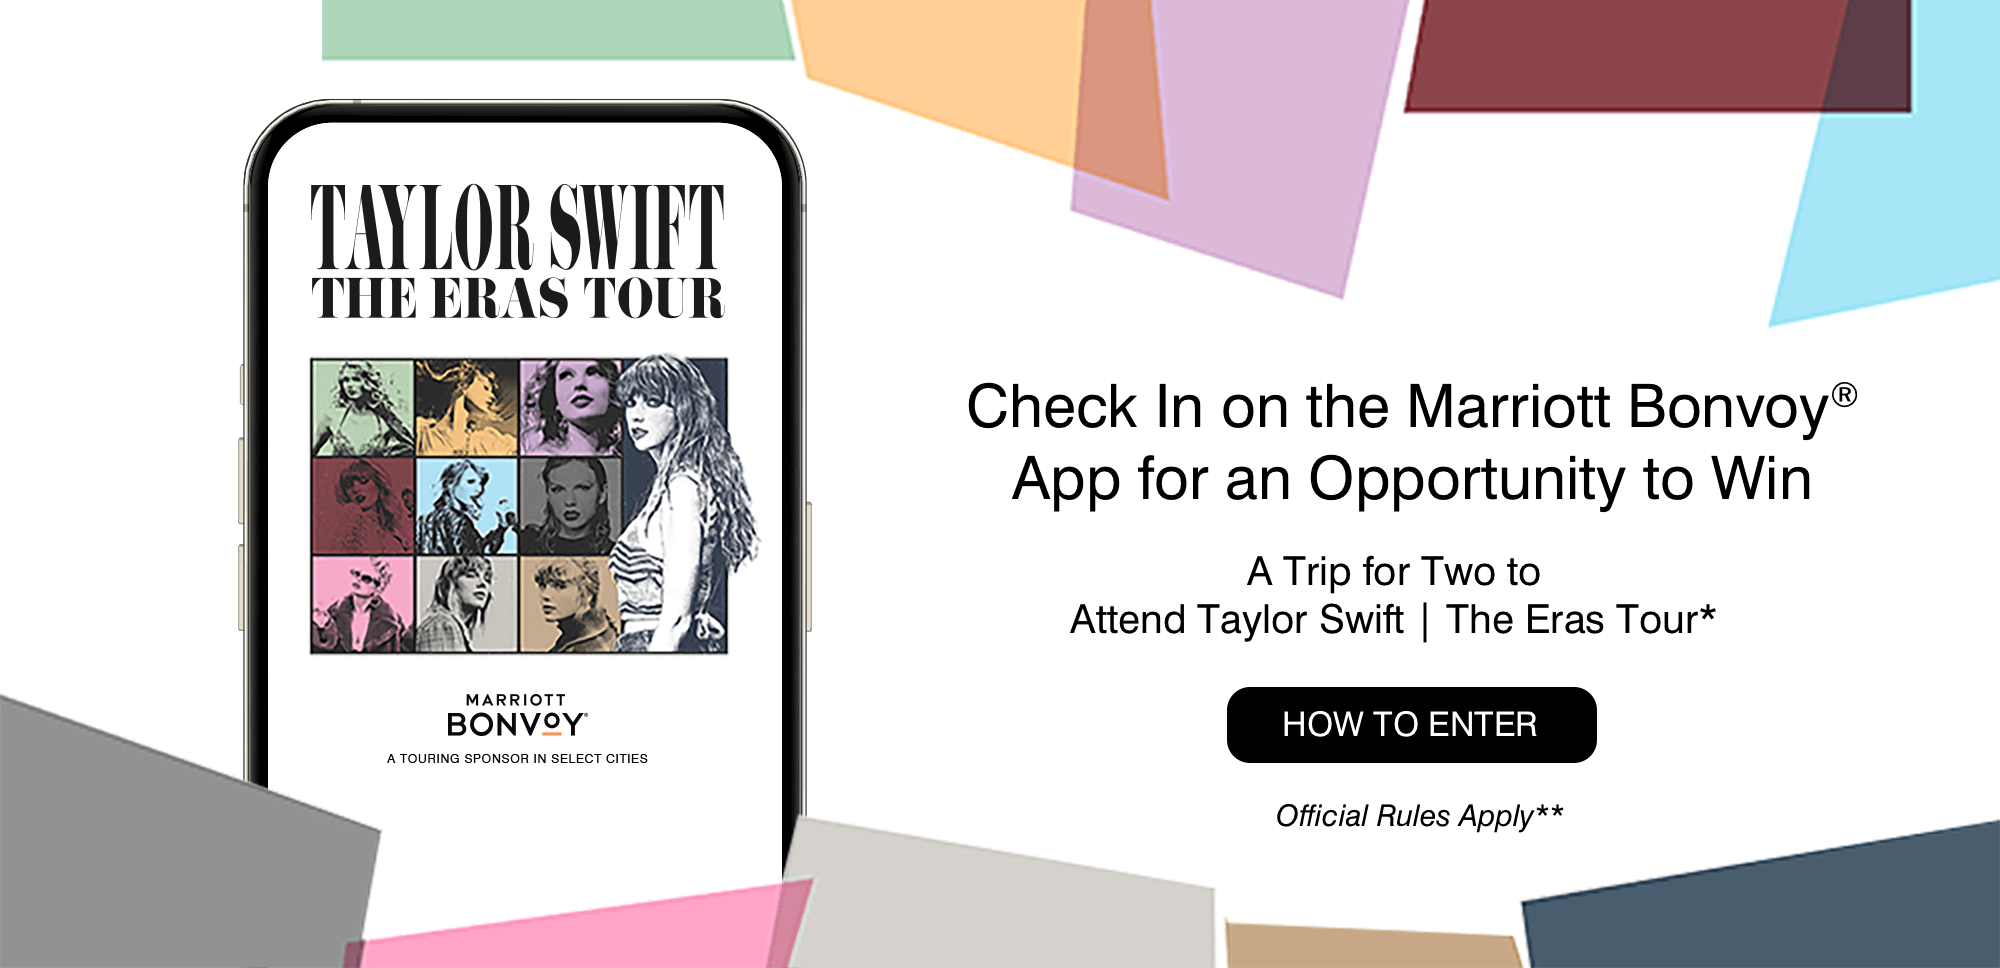 Marriott Bonvoy® App promotion: Enter to win a trip for two to attend Taylor Swift's Eras Tour. Official Rules Apply.